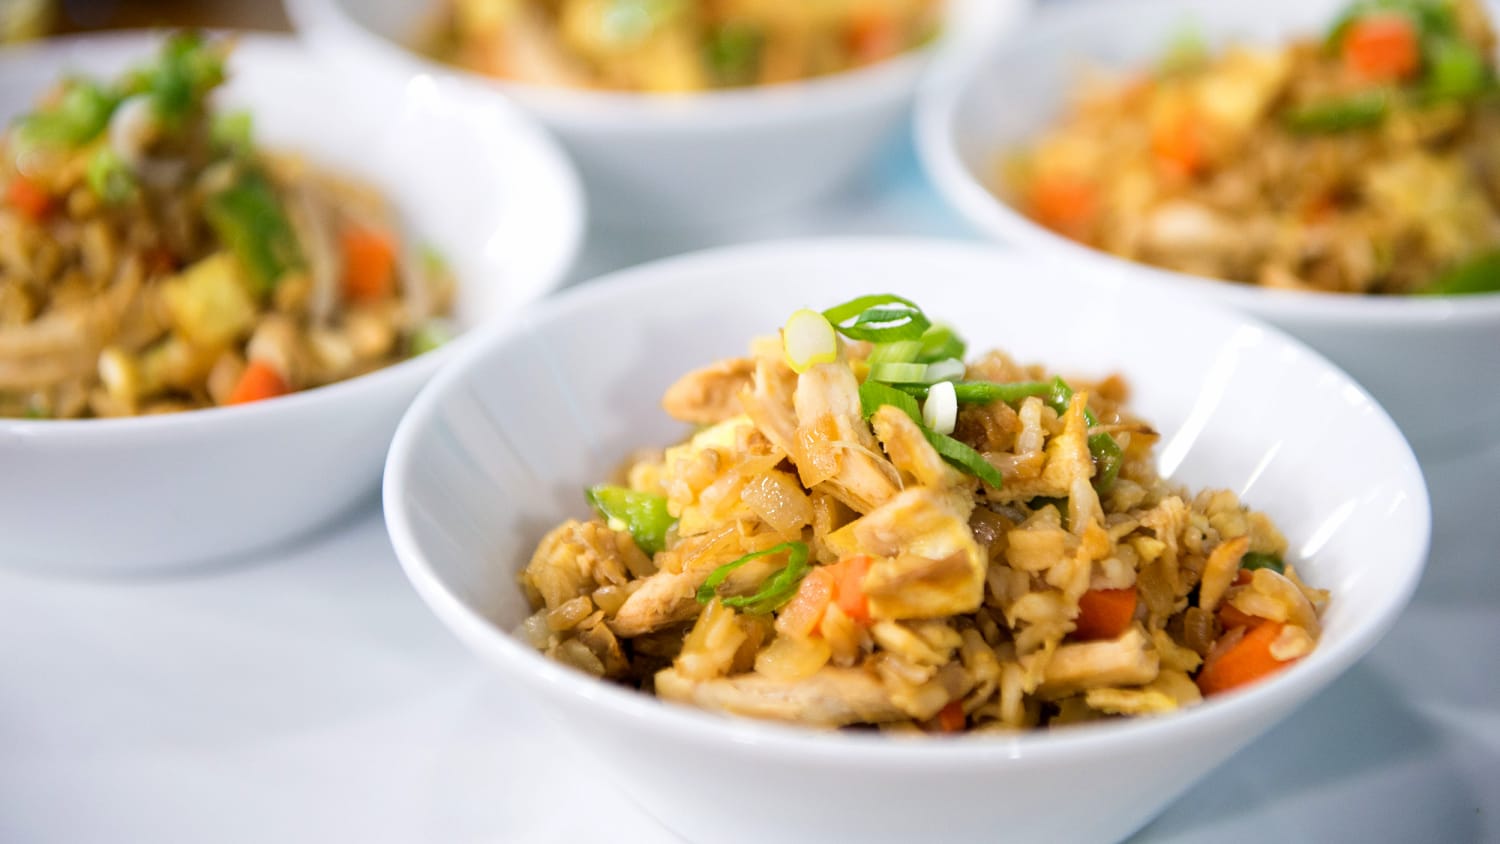 https://media-cldnry.s-nbcnews.com/image/upload/newscms/2017_01/1185673/healthy-one-pan-chicken-fried-rice-today-170104-tease-02.jpg